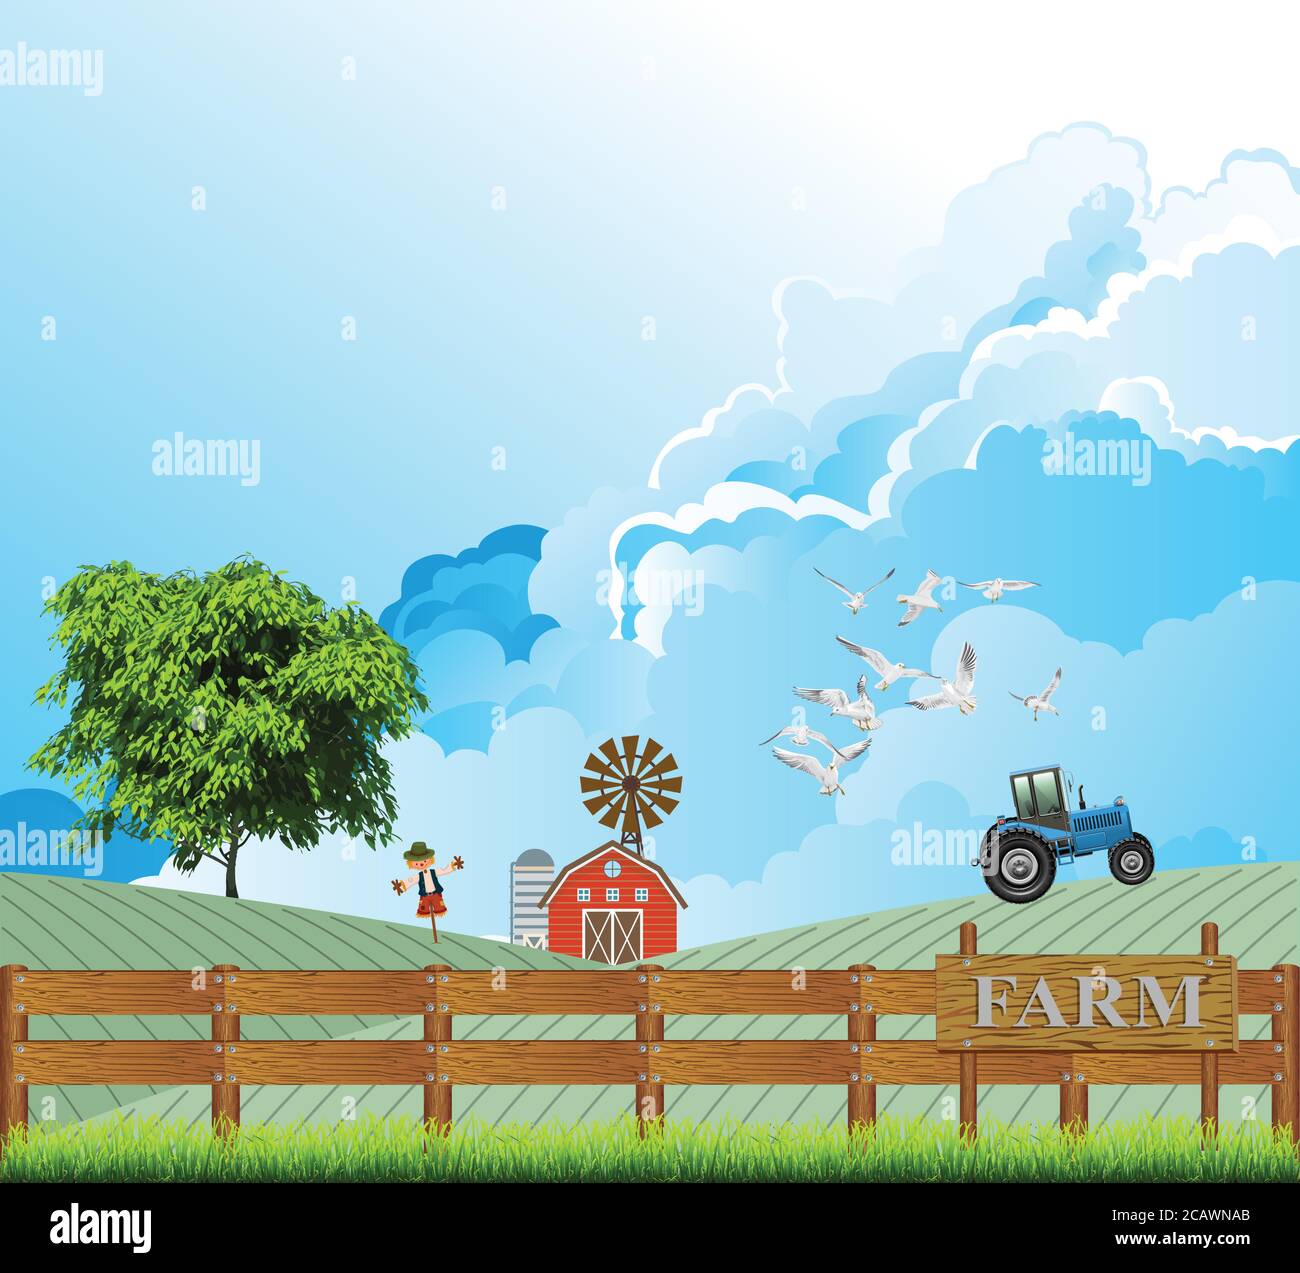 Picturesque rural scene with tractor working on a farm with seagulls flying close to the vehicle set against a blue cloudy sky Stock Vector